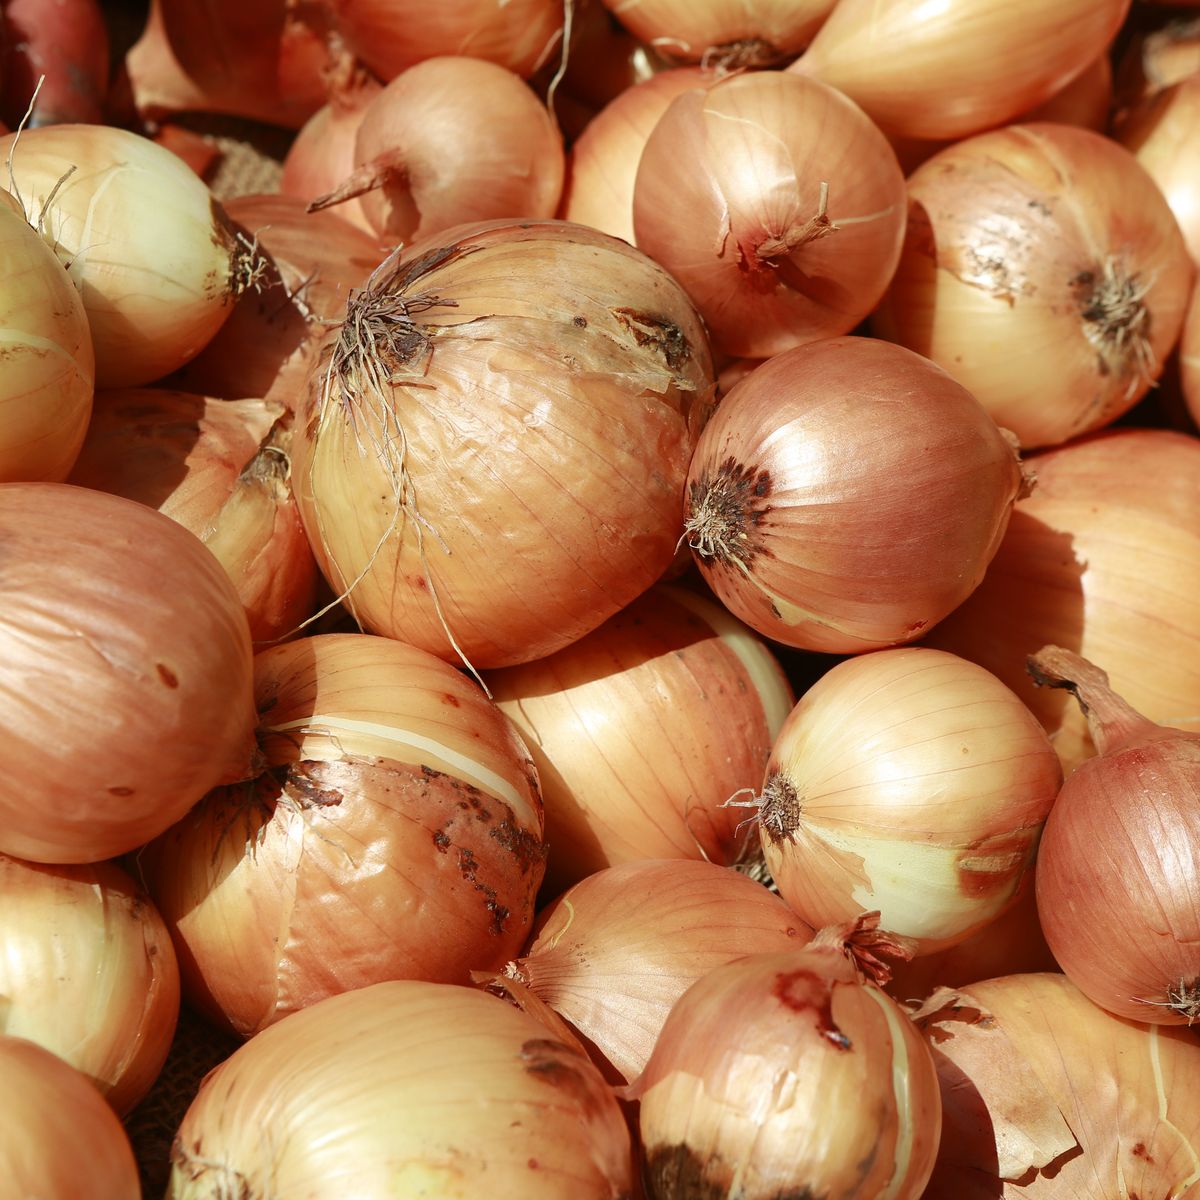 Benefits of Onions | Health Benefits of Onions